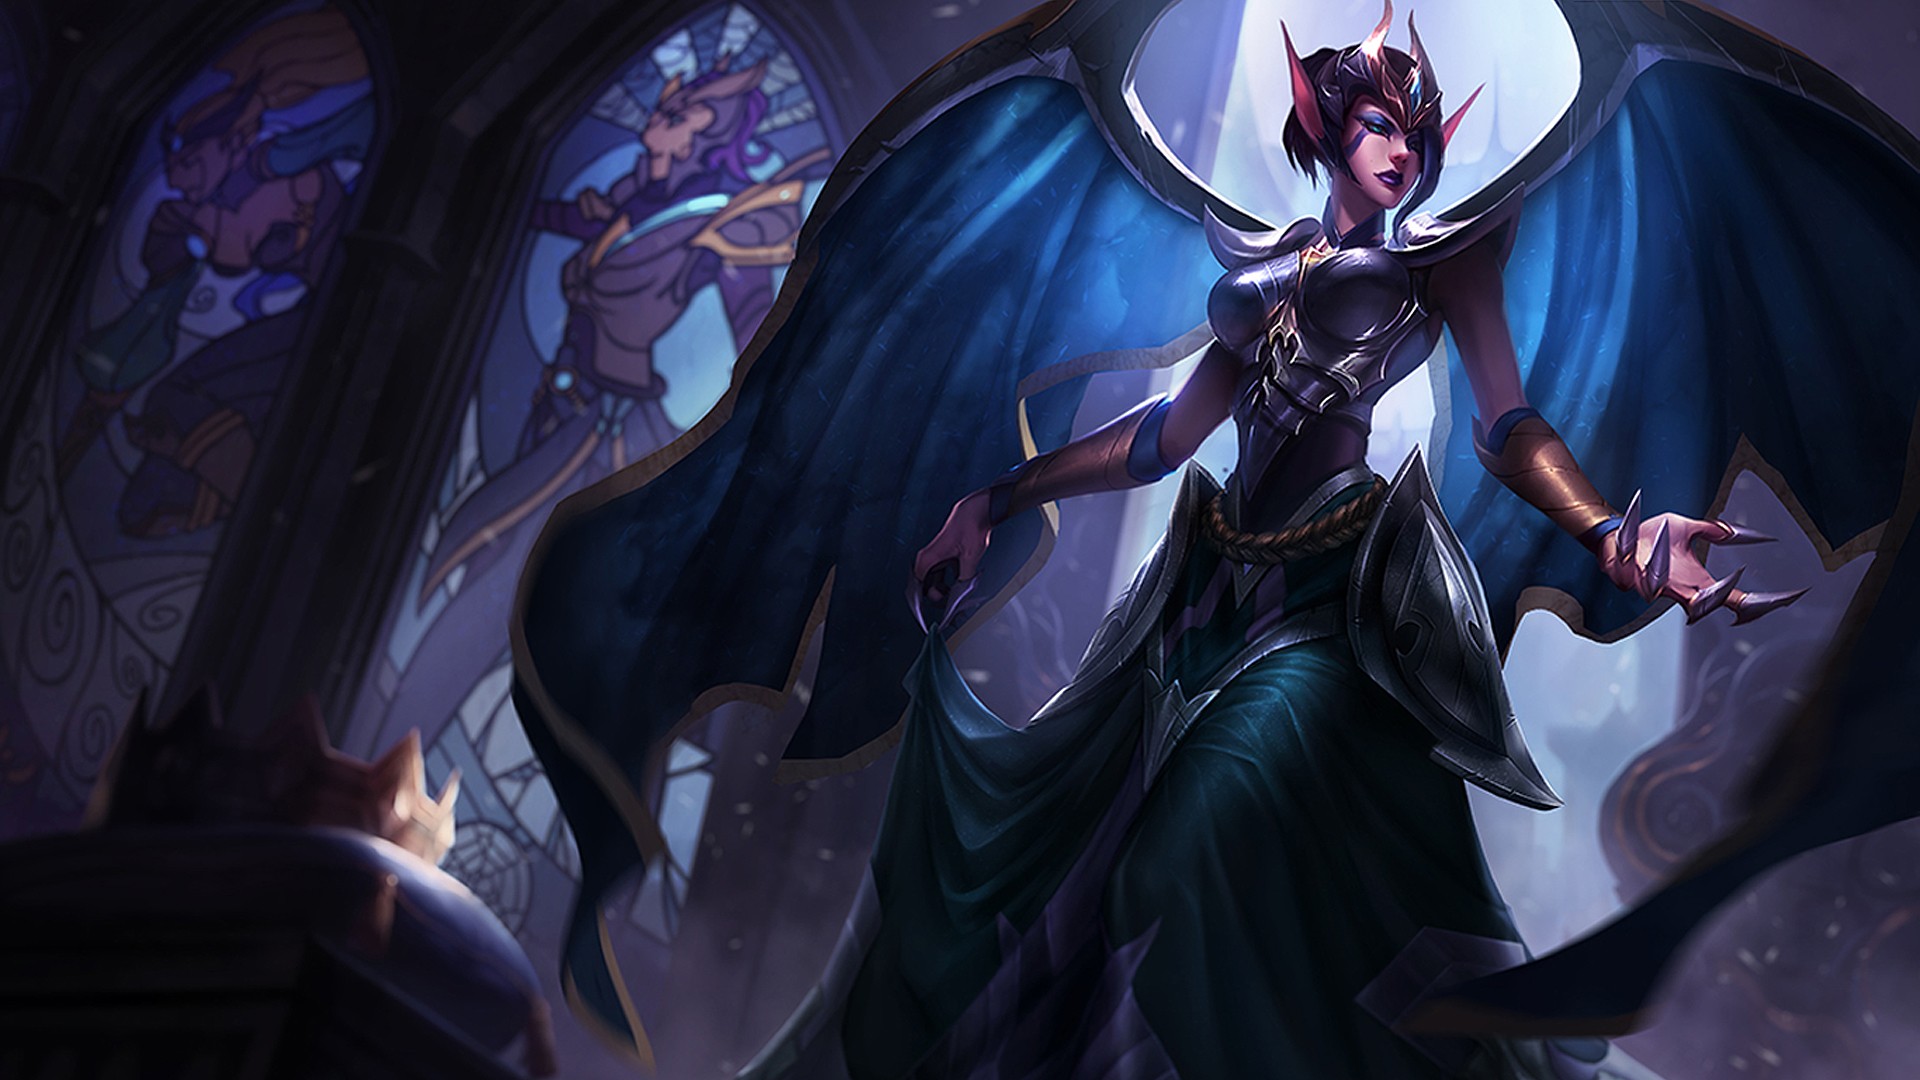 General 1920x1080 League of Legends video games Morgana (League of Legends) video game art PC gaming women video game girls fantasy art fantasy girl wings pointy ears claws